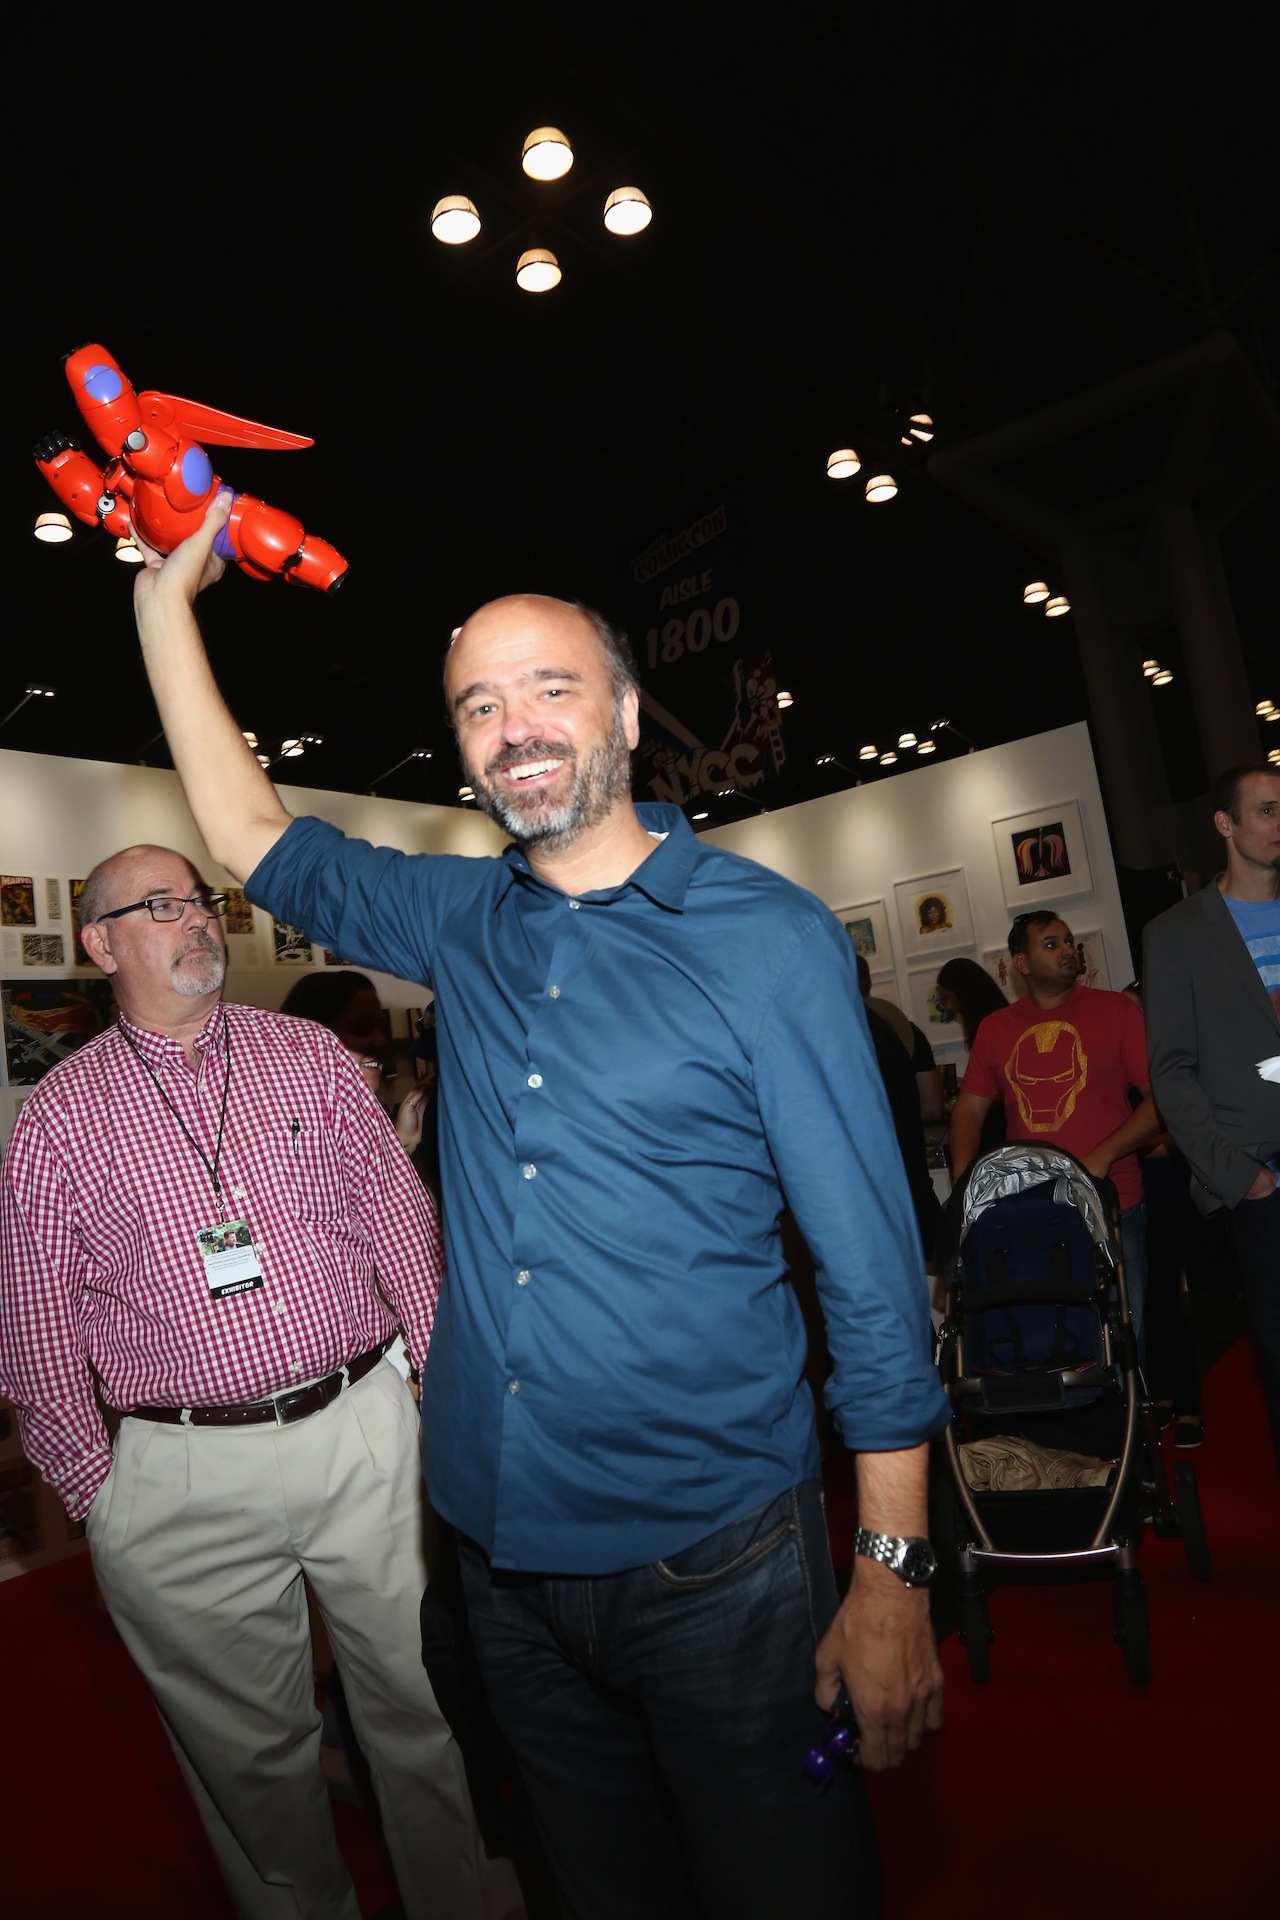 NEW YORK, NY - OCTOBER 09:  Actor Scott Adsit attends Walt Disney Studios' 2014 New York Comic Con presentations of "Big Hero 6" and "Tomorrowland" at the Javits Convention Center on Thursday October 9, 2014 in New York City.  (Photo by Jason Carter Rinaldi/Getty Images for Disney) *** Local Caption *** Scott Adsit